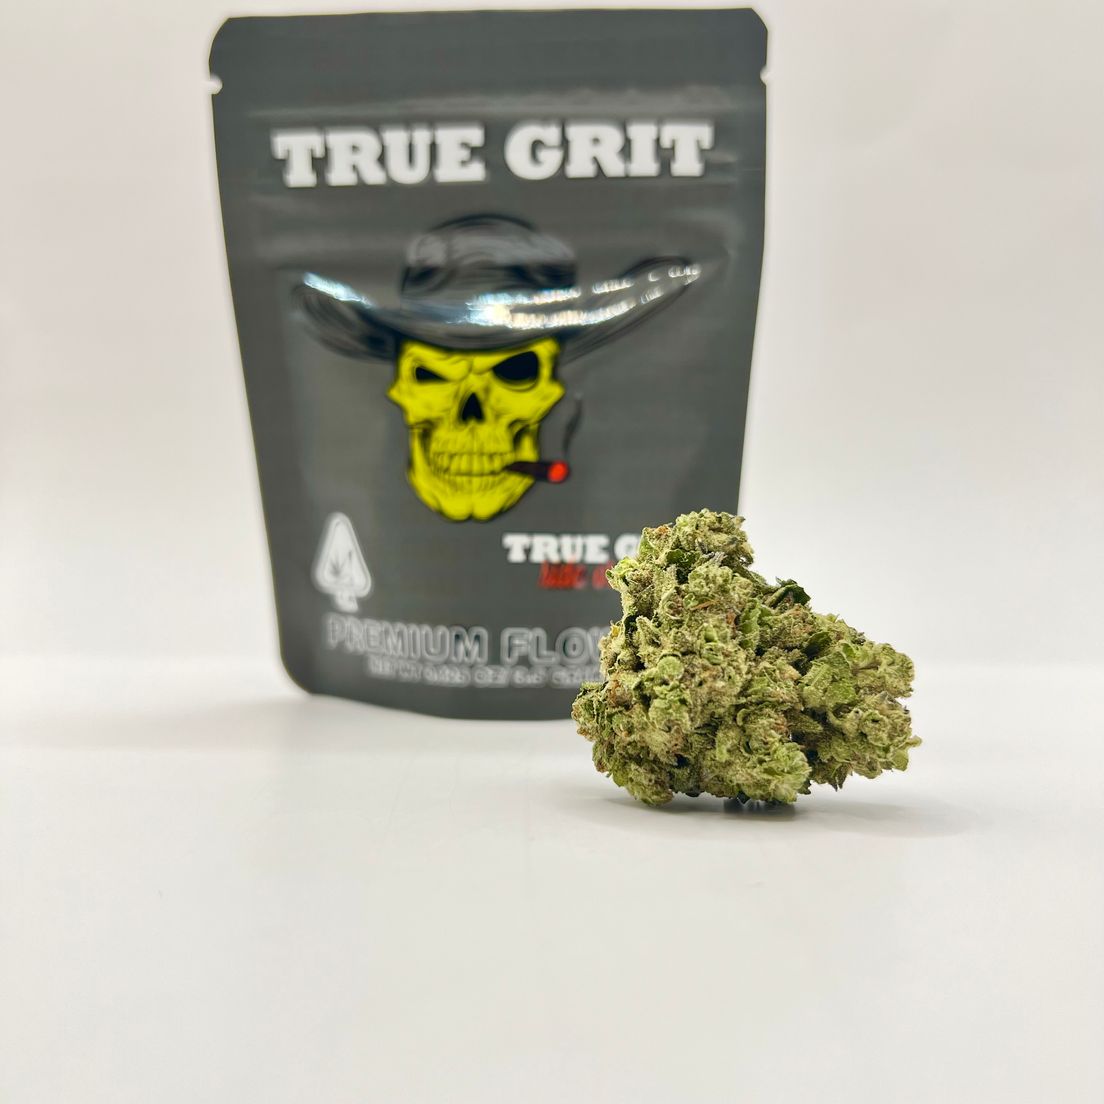 *BLOWOUT DEAL! $25 1/8 Rainbow Cookies (28.38%/Indica) - True Grit